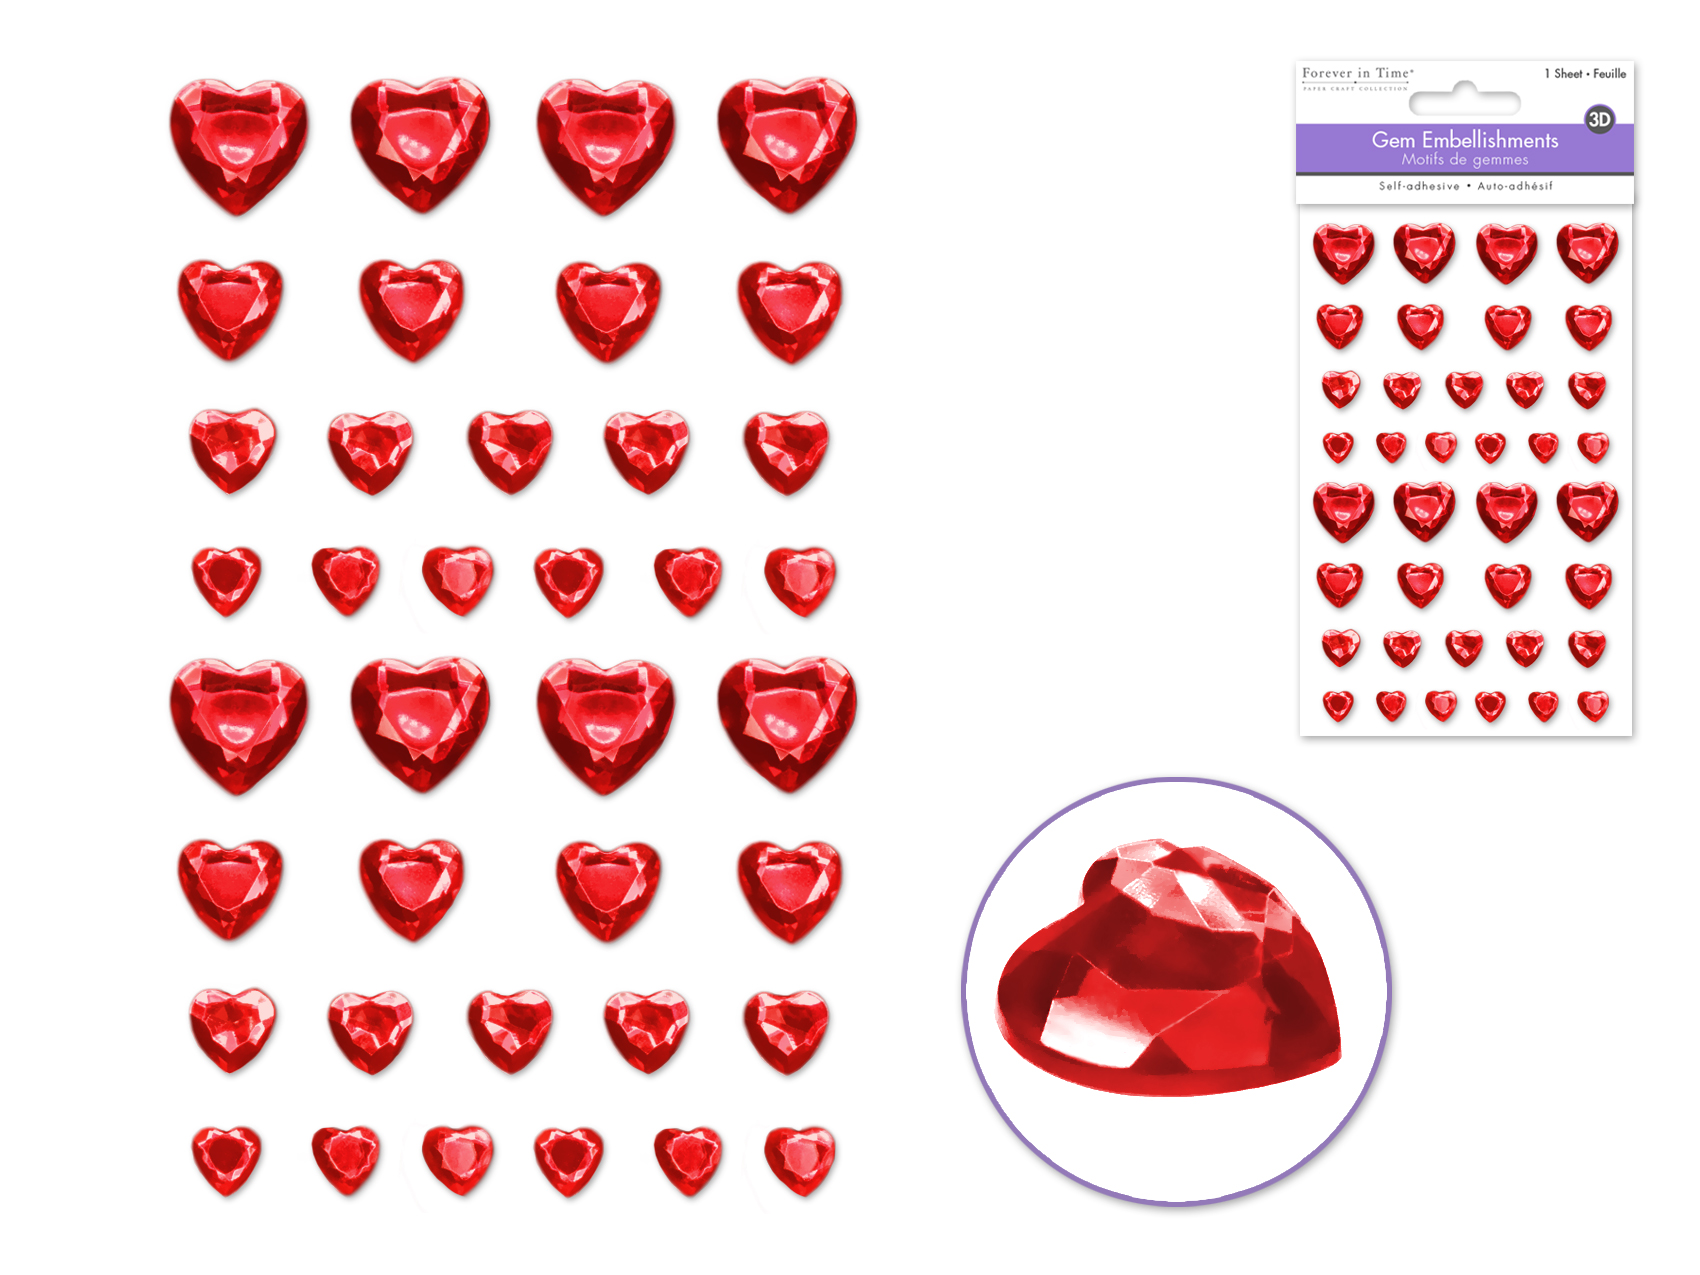 Forever In Time 3D Gem Stickers 38 pc asst - Red Hearts